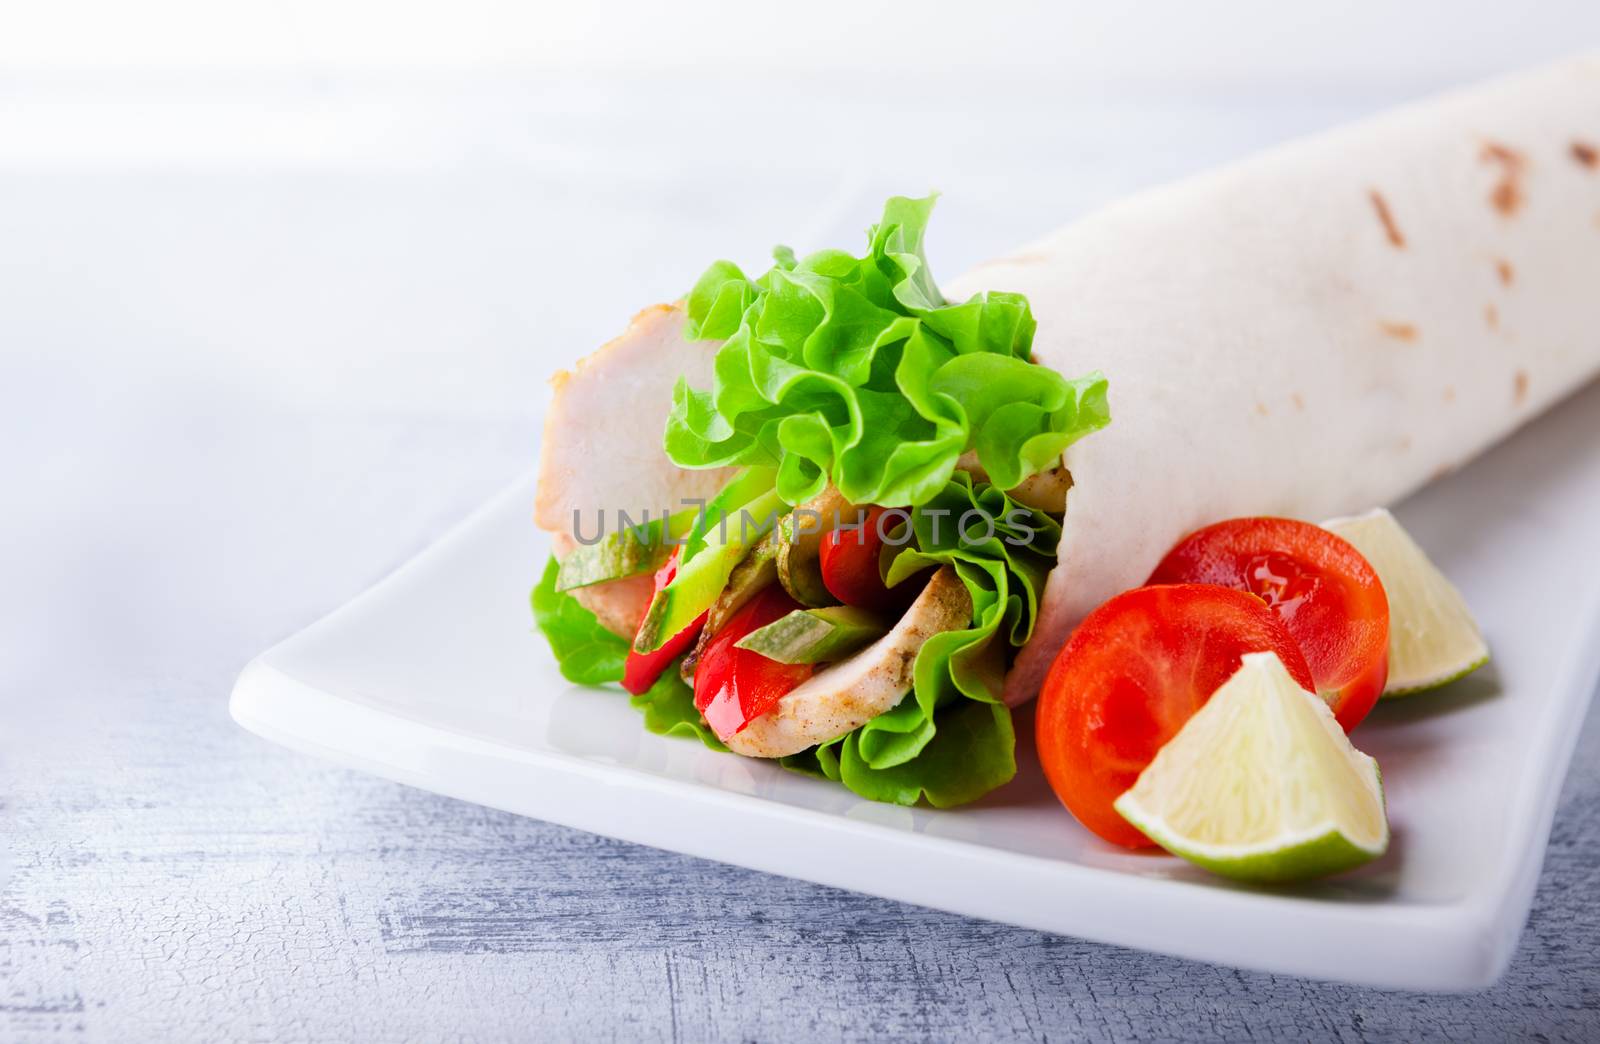 Sandwich wrap with garden salad, chicken, lettuce and tomato in a whole wheat tortilla 